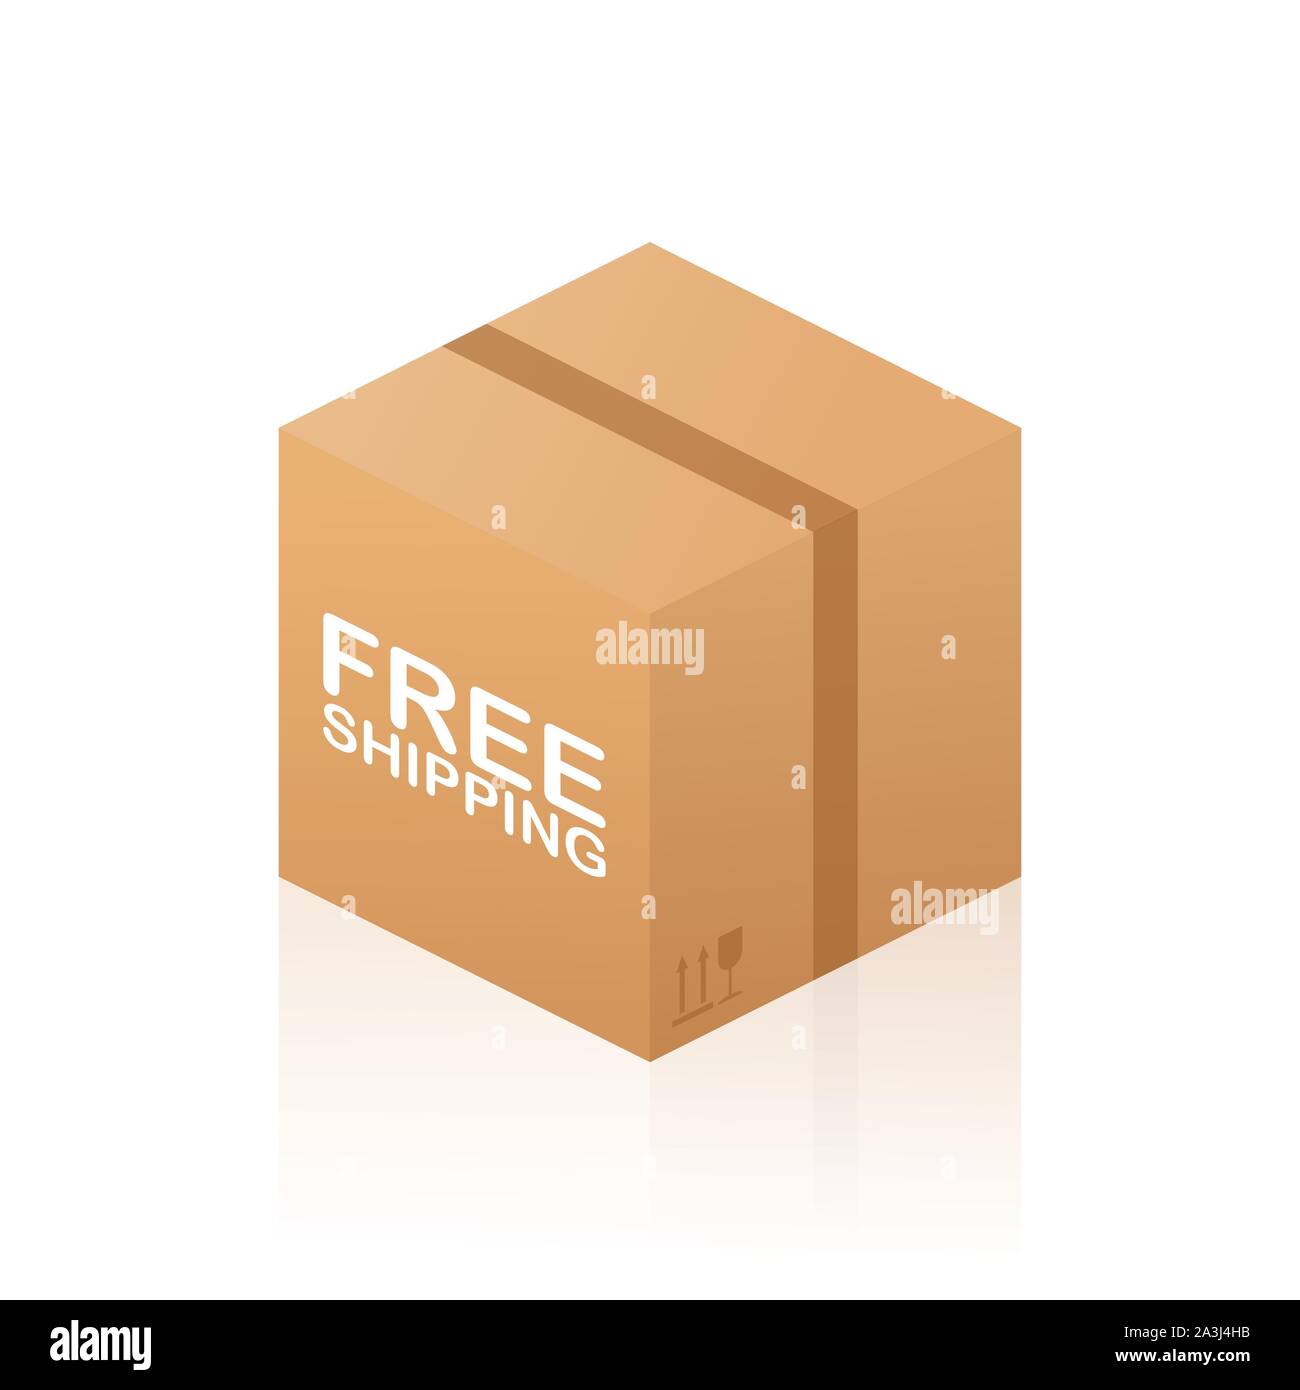 Free Shipping Cardboard Box on white background. Vector stock illustration. Stock Vector